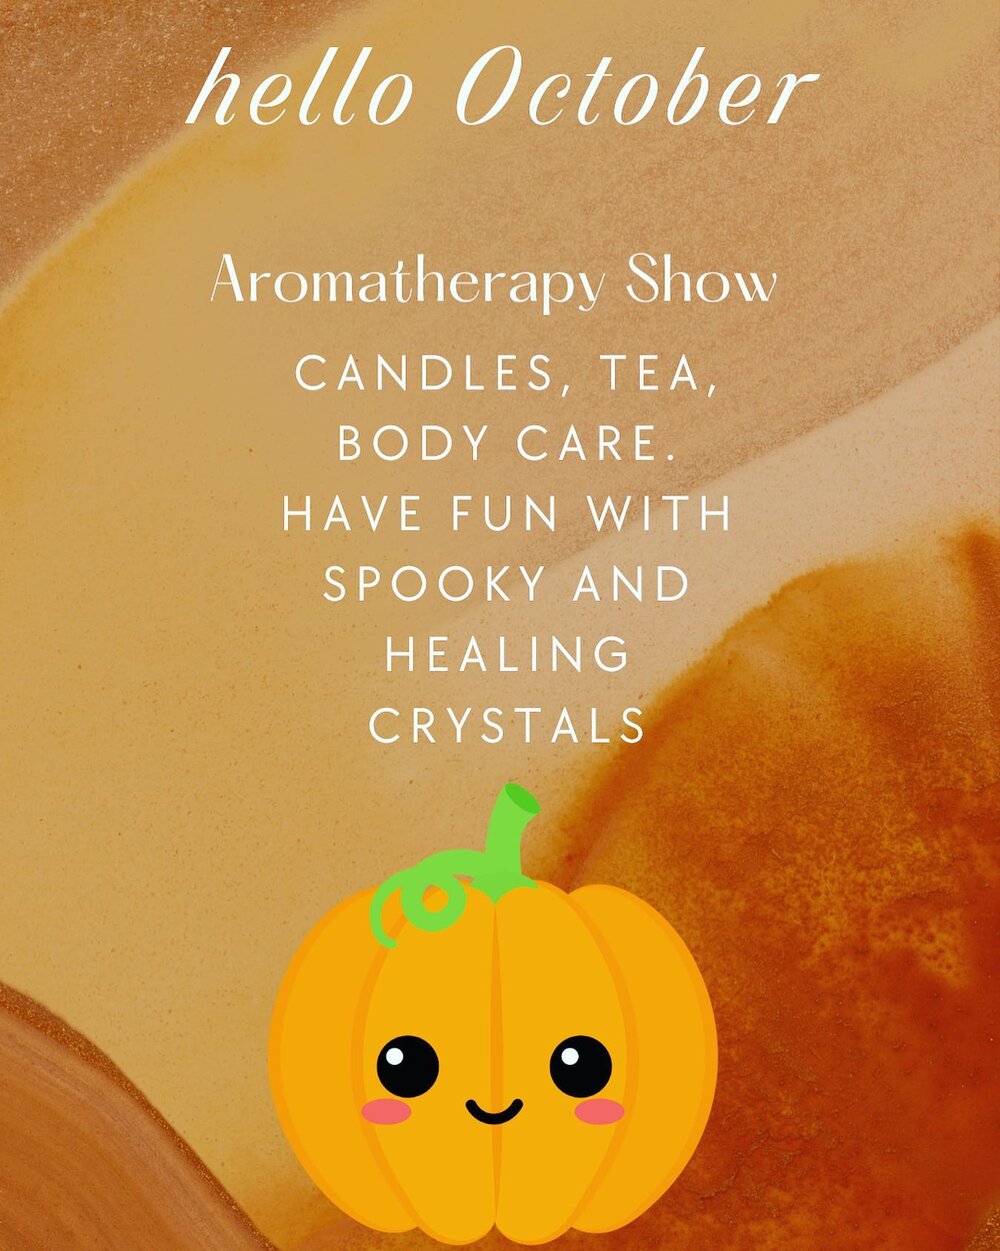 Friday the 13th will be spooktacular

Join us live on #whatnot 9:44pm est

Aromatherapy
Tea
Body care
Healing crystals
Custom healing kits 
and buyers Giveaways!!